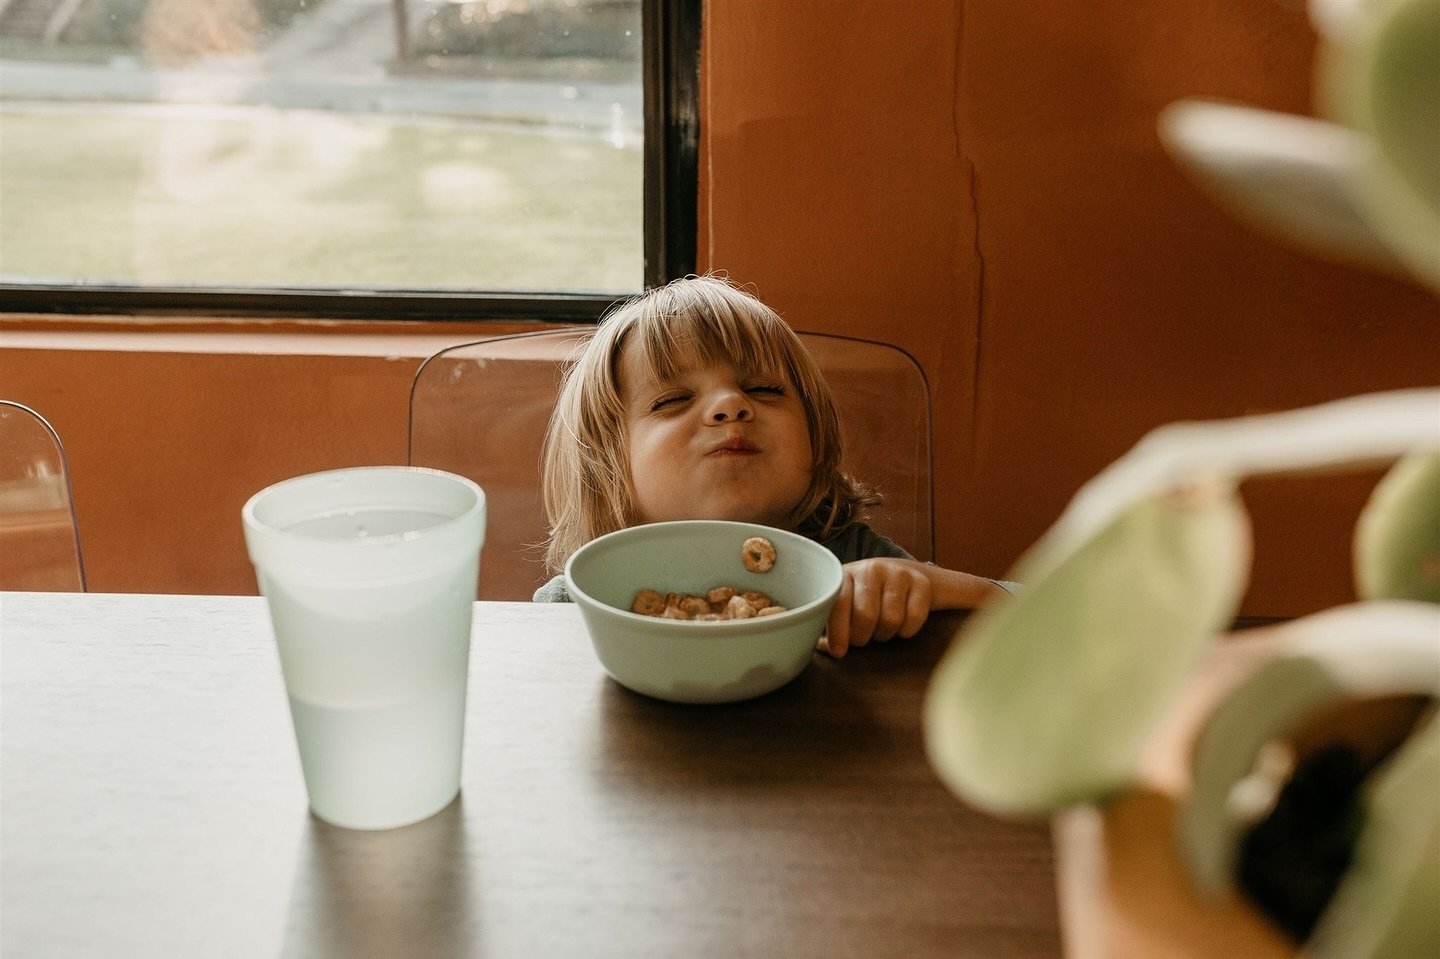 Breakfast at home :) 💛 these are always my favorites type of sessions

&mdash;&mdash;&mdash;&mdash;
Lauren LaBoyteaux is a parenthood documentary + lifestyle photographer in ETX and DFW area, specializing in birth, fresh 48, at home family, newborn 